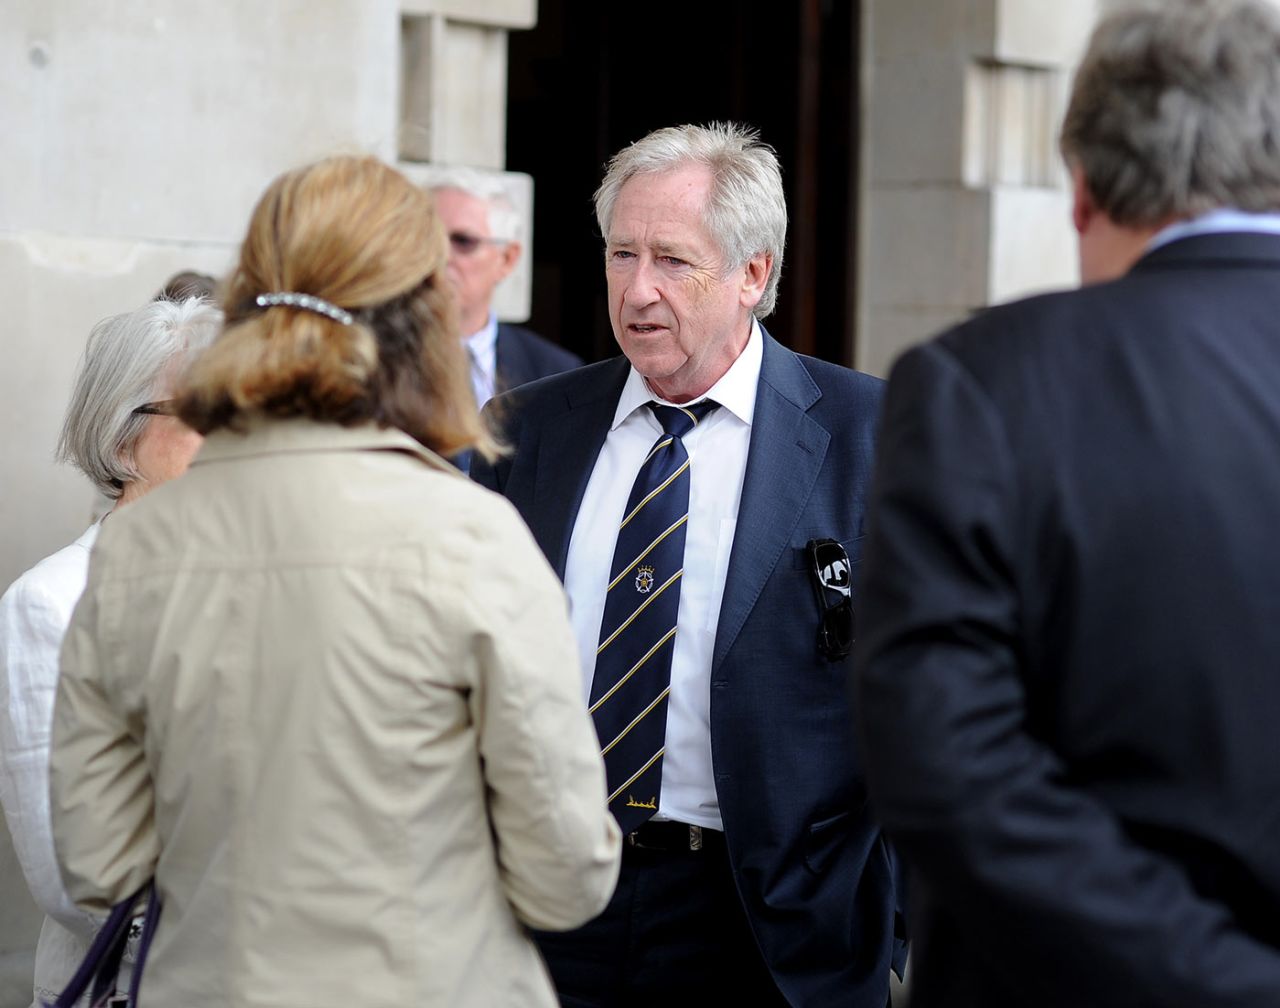 Rod Bransgrove at the memorial service for Tony Greig, London, June 24, 2013